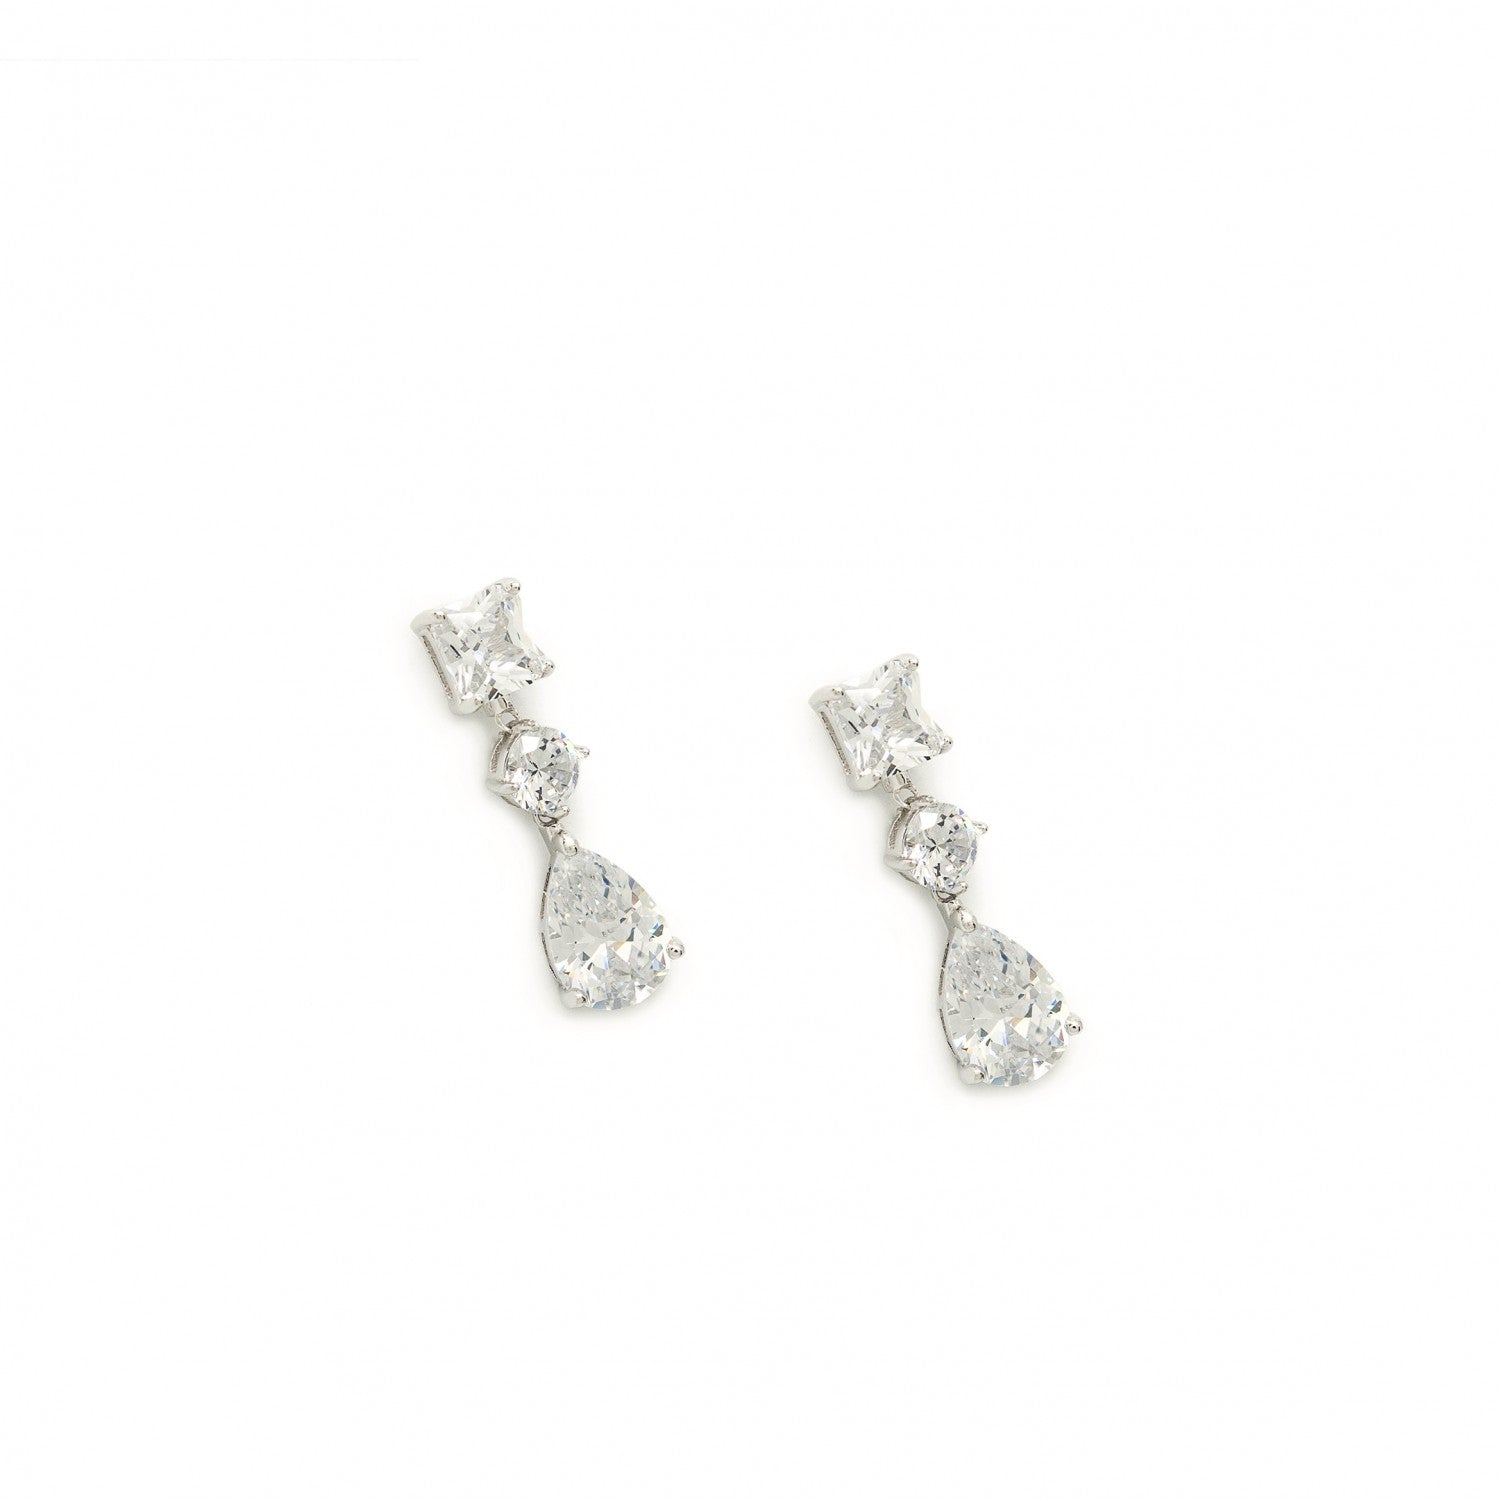 Classic small bridal earrings with claws